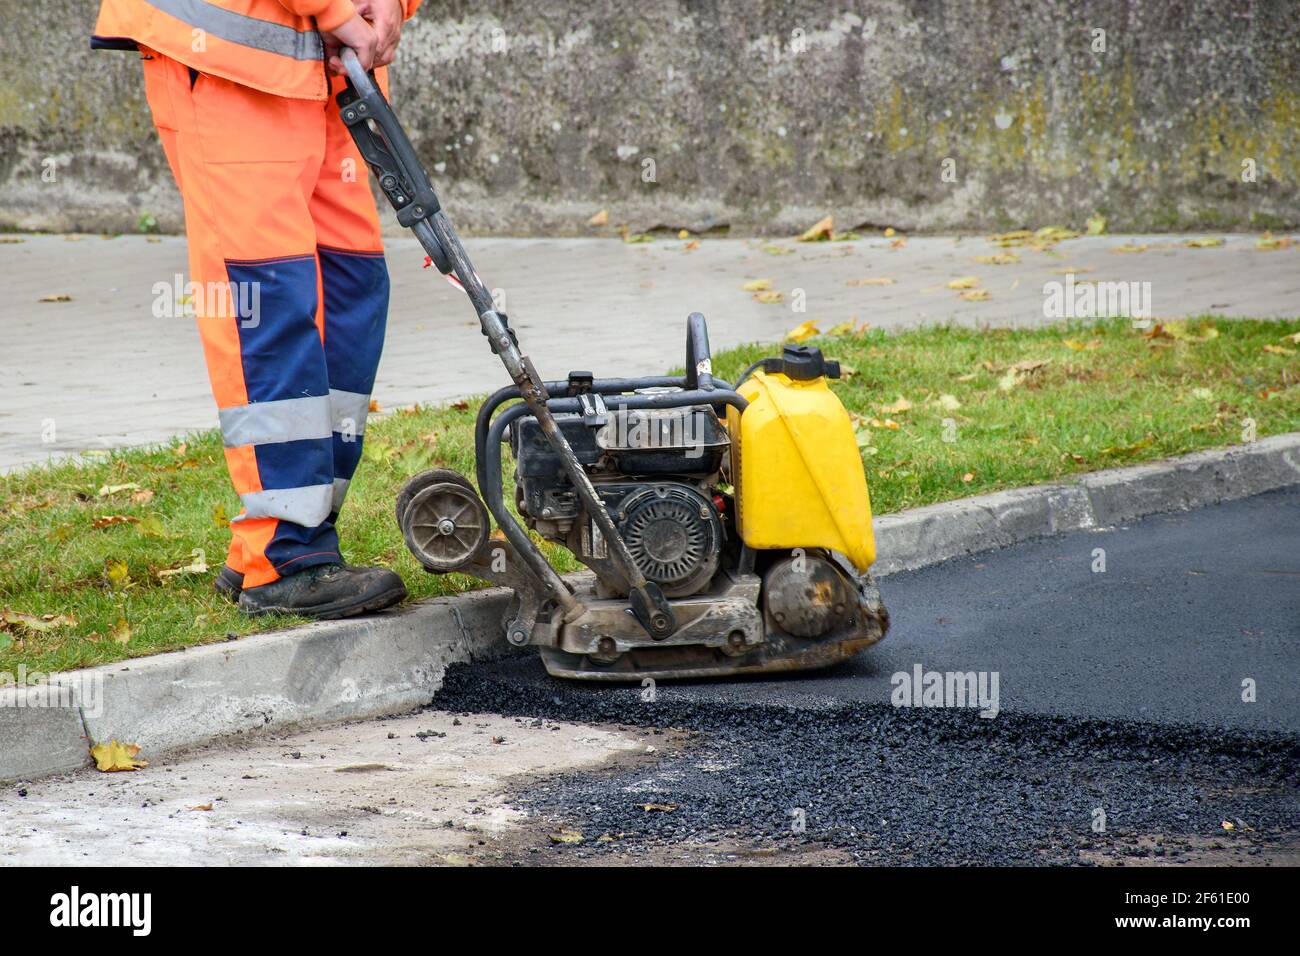 Paving worker uses vibratory plate compactor to compact new asphalt near curbstones Stock Photo